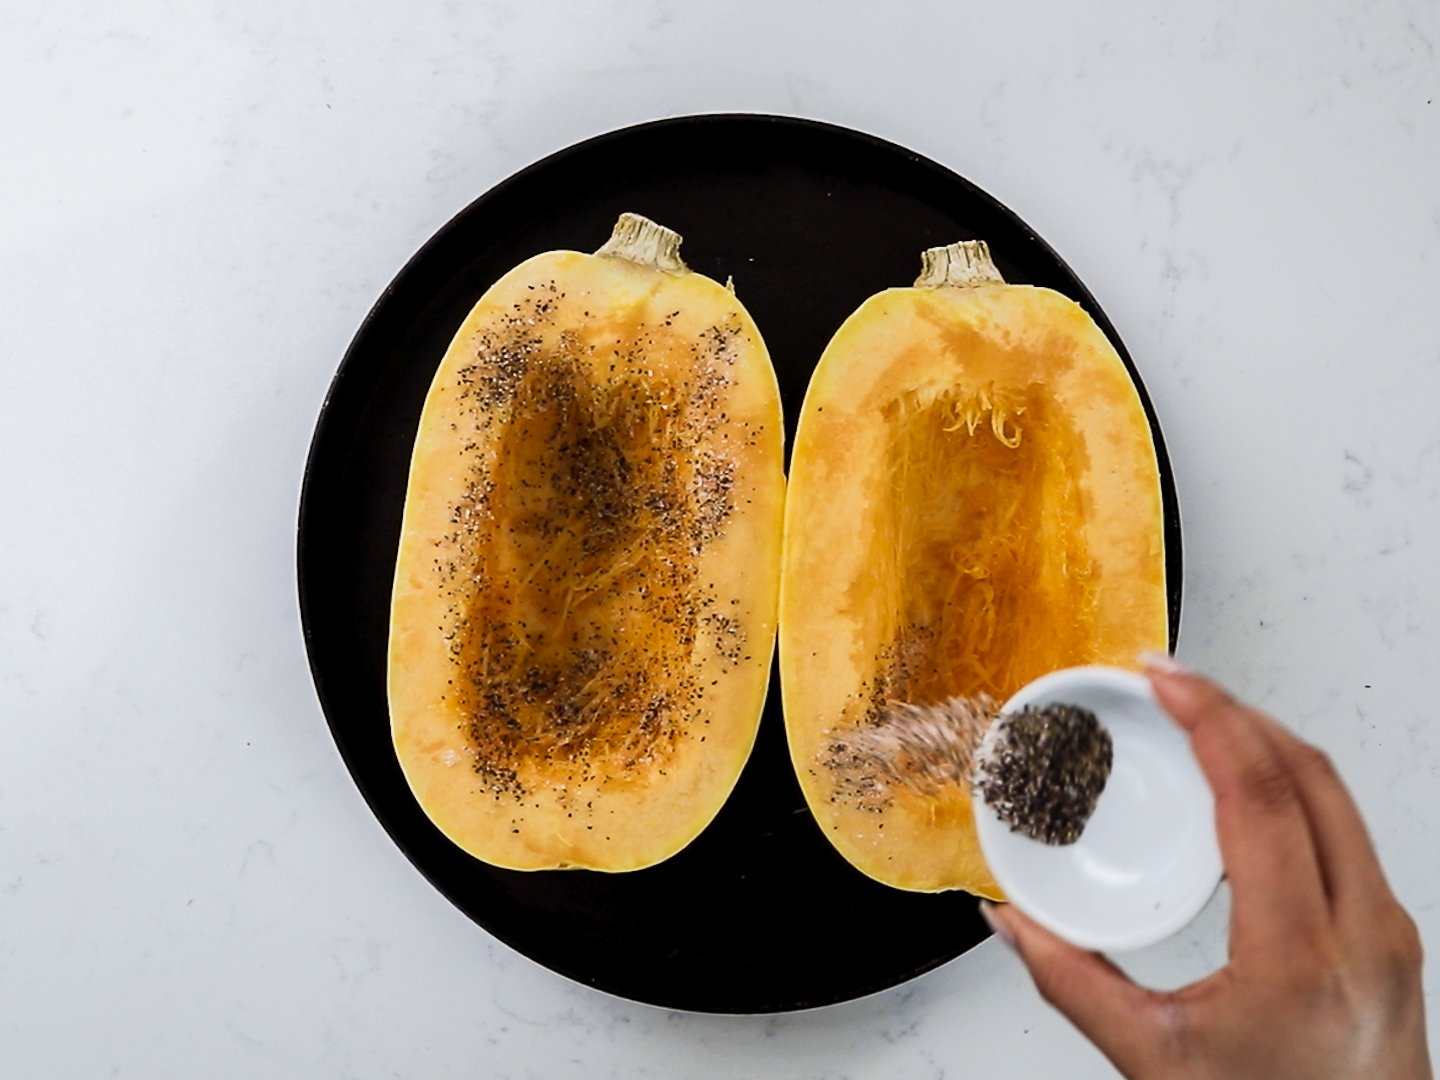 A hand sprinkling a mixture of salt and pepper in a ramekin over two halves of spaghetti squash.